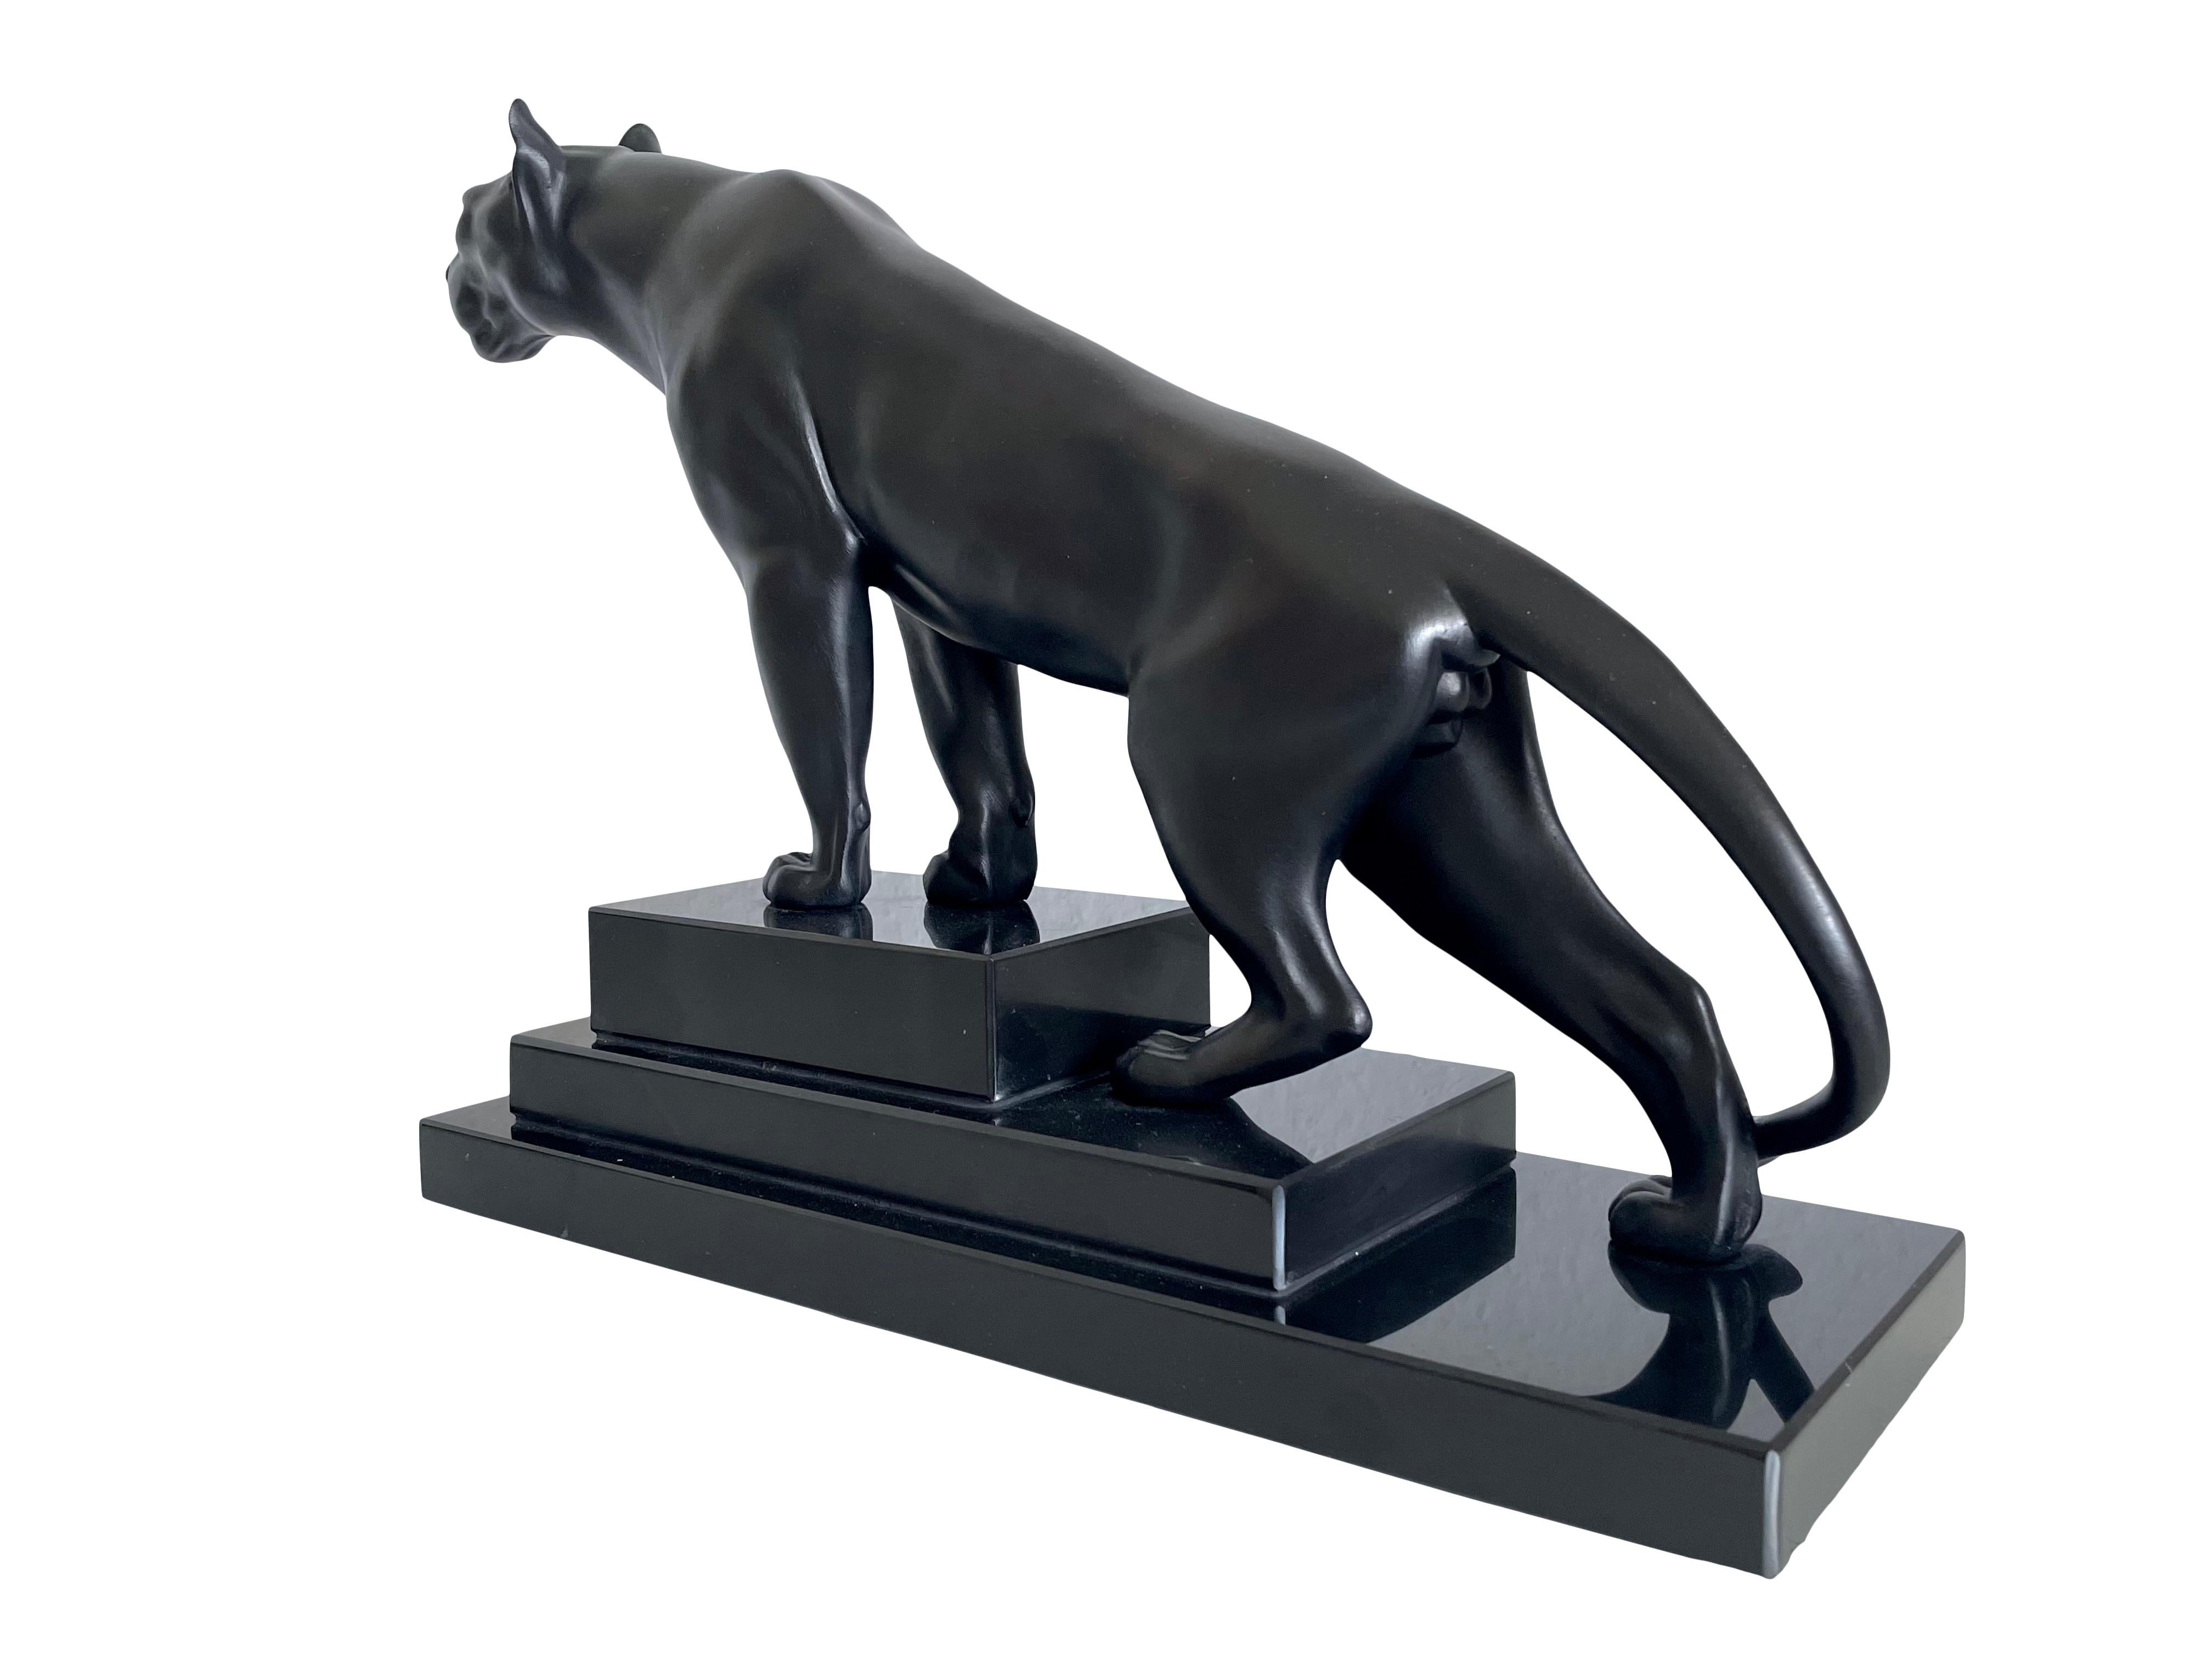 French Art Deco Style Black Panther Sculpture by Max Le Verrier on Stepped Marble Base For Sale